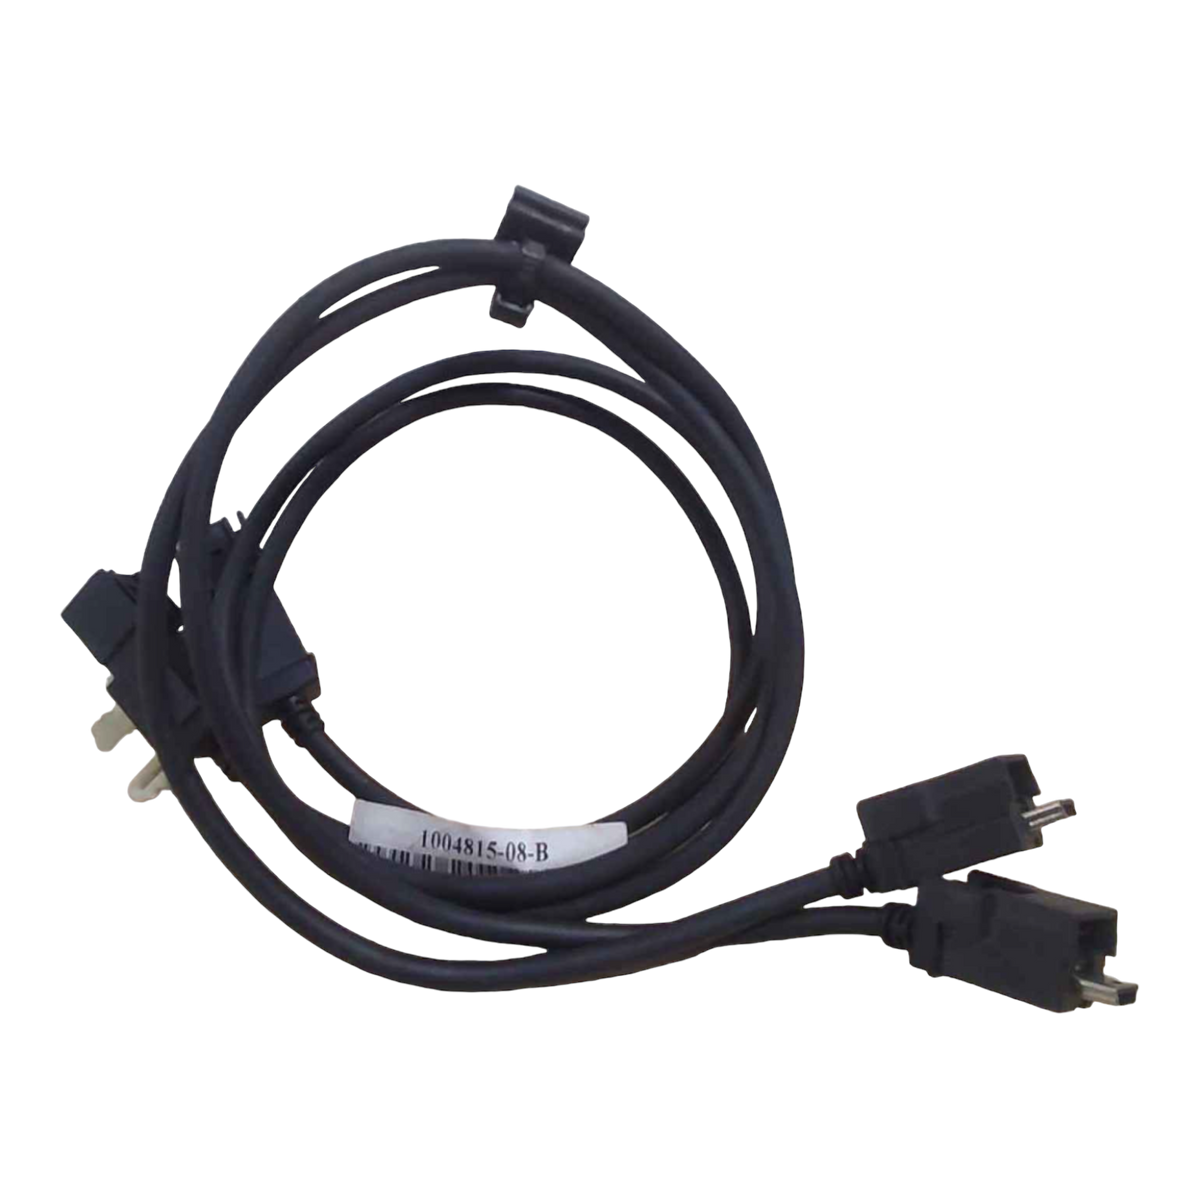 TESLA MODEL S  USB CABLE - TOUCH SCREEN TO FEMALE CONNECTOR 1004815-08-B